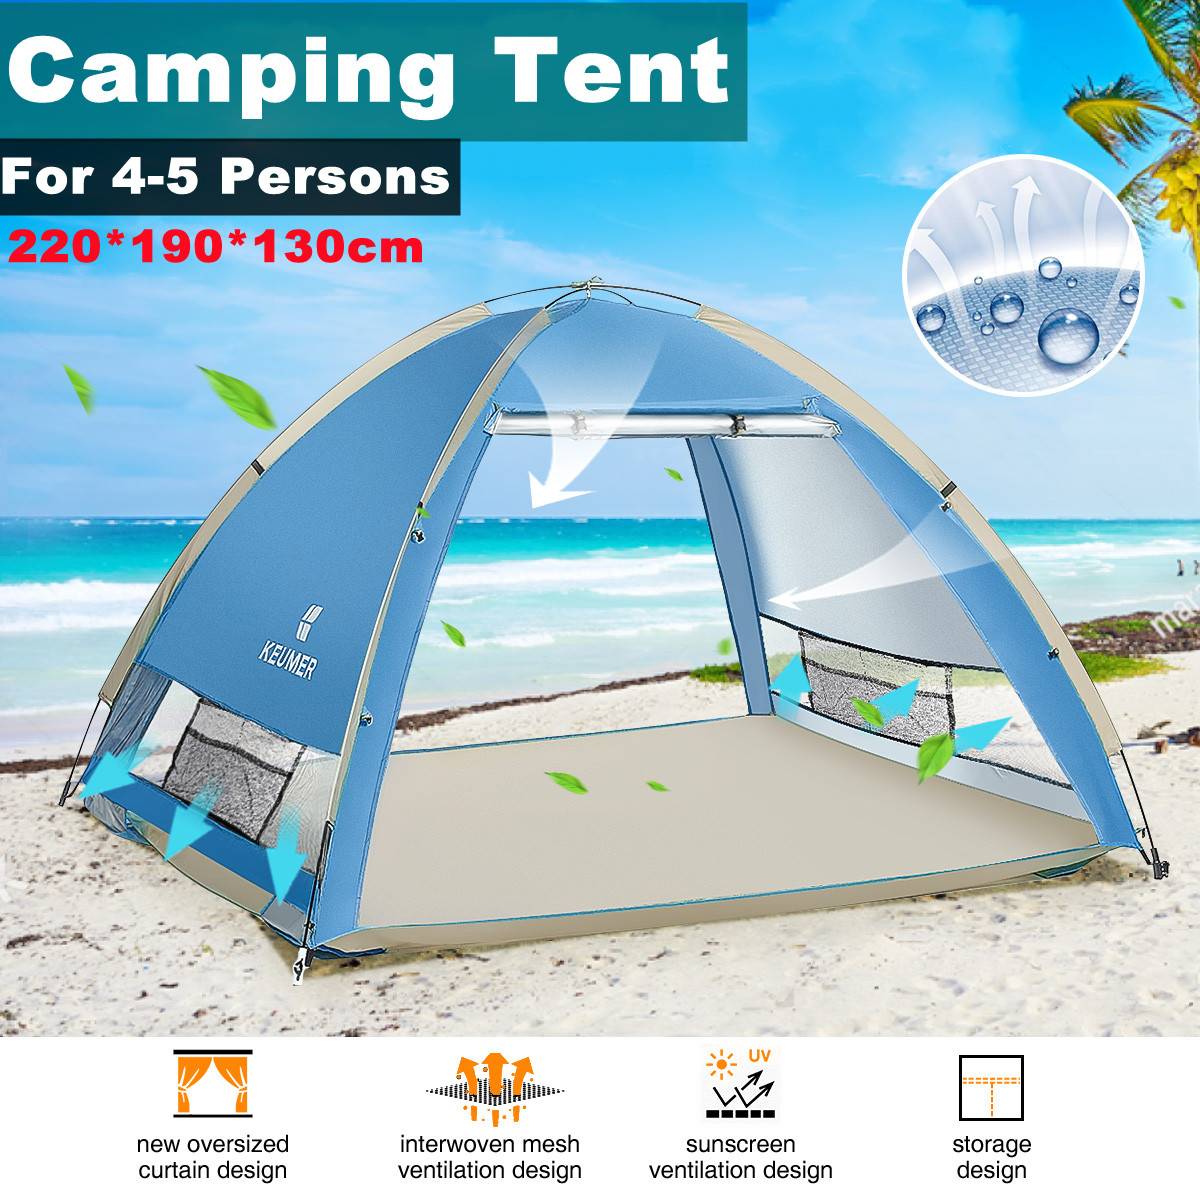 Goat tent camping new york state Mobi Garden Outdoor 3-4 Person Cotton Camping Tent Large Space Double Outer Tent With Awning Waterproof Breathable Family Tent subaru tent camping